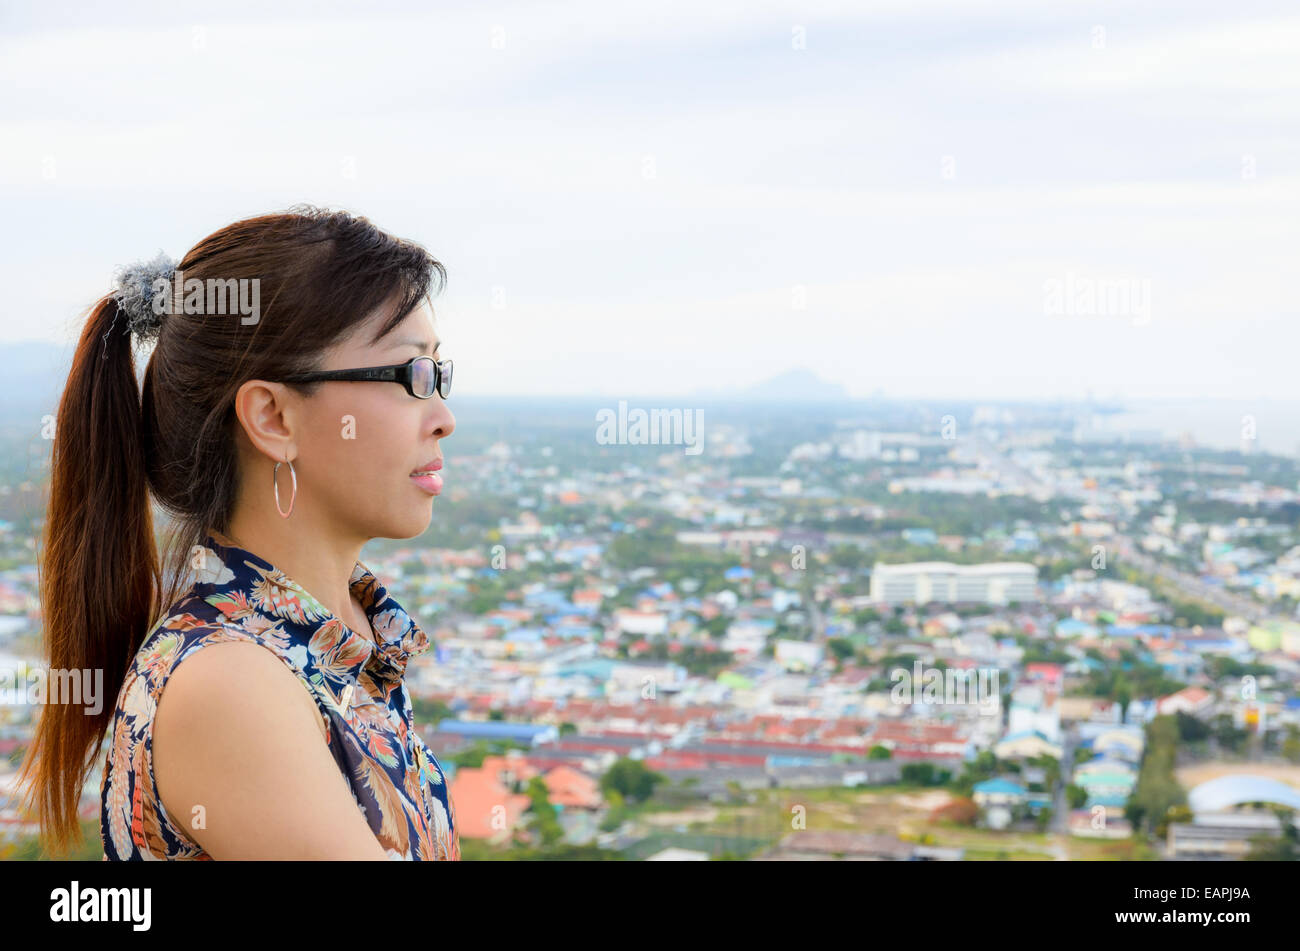 Women look at a view of the Hua Hin city from on high in Thailand Stock Photo